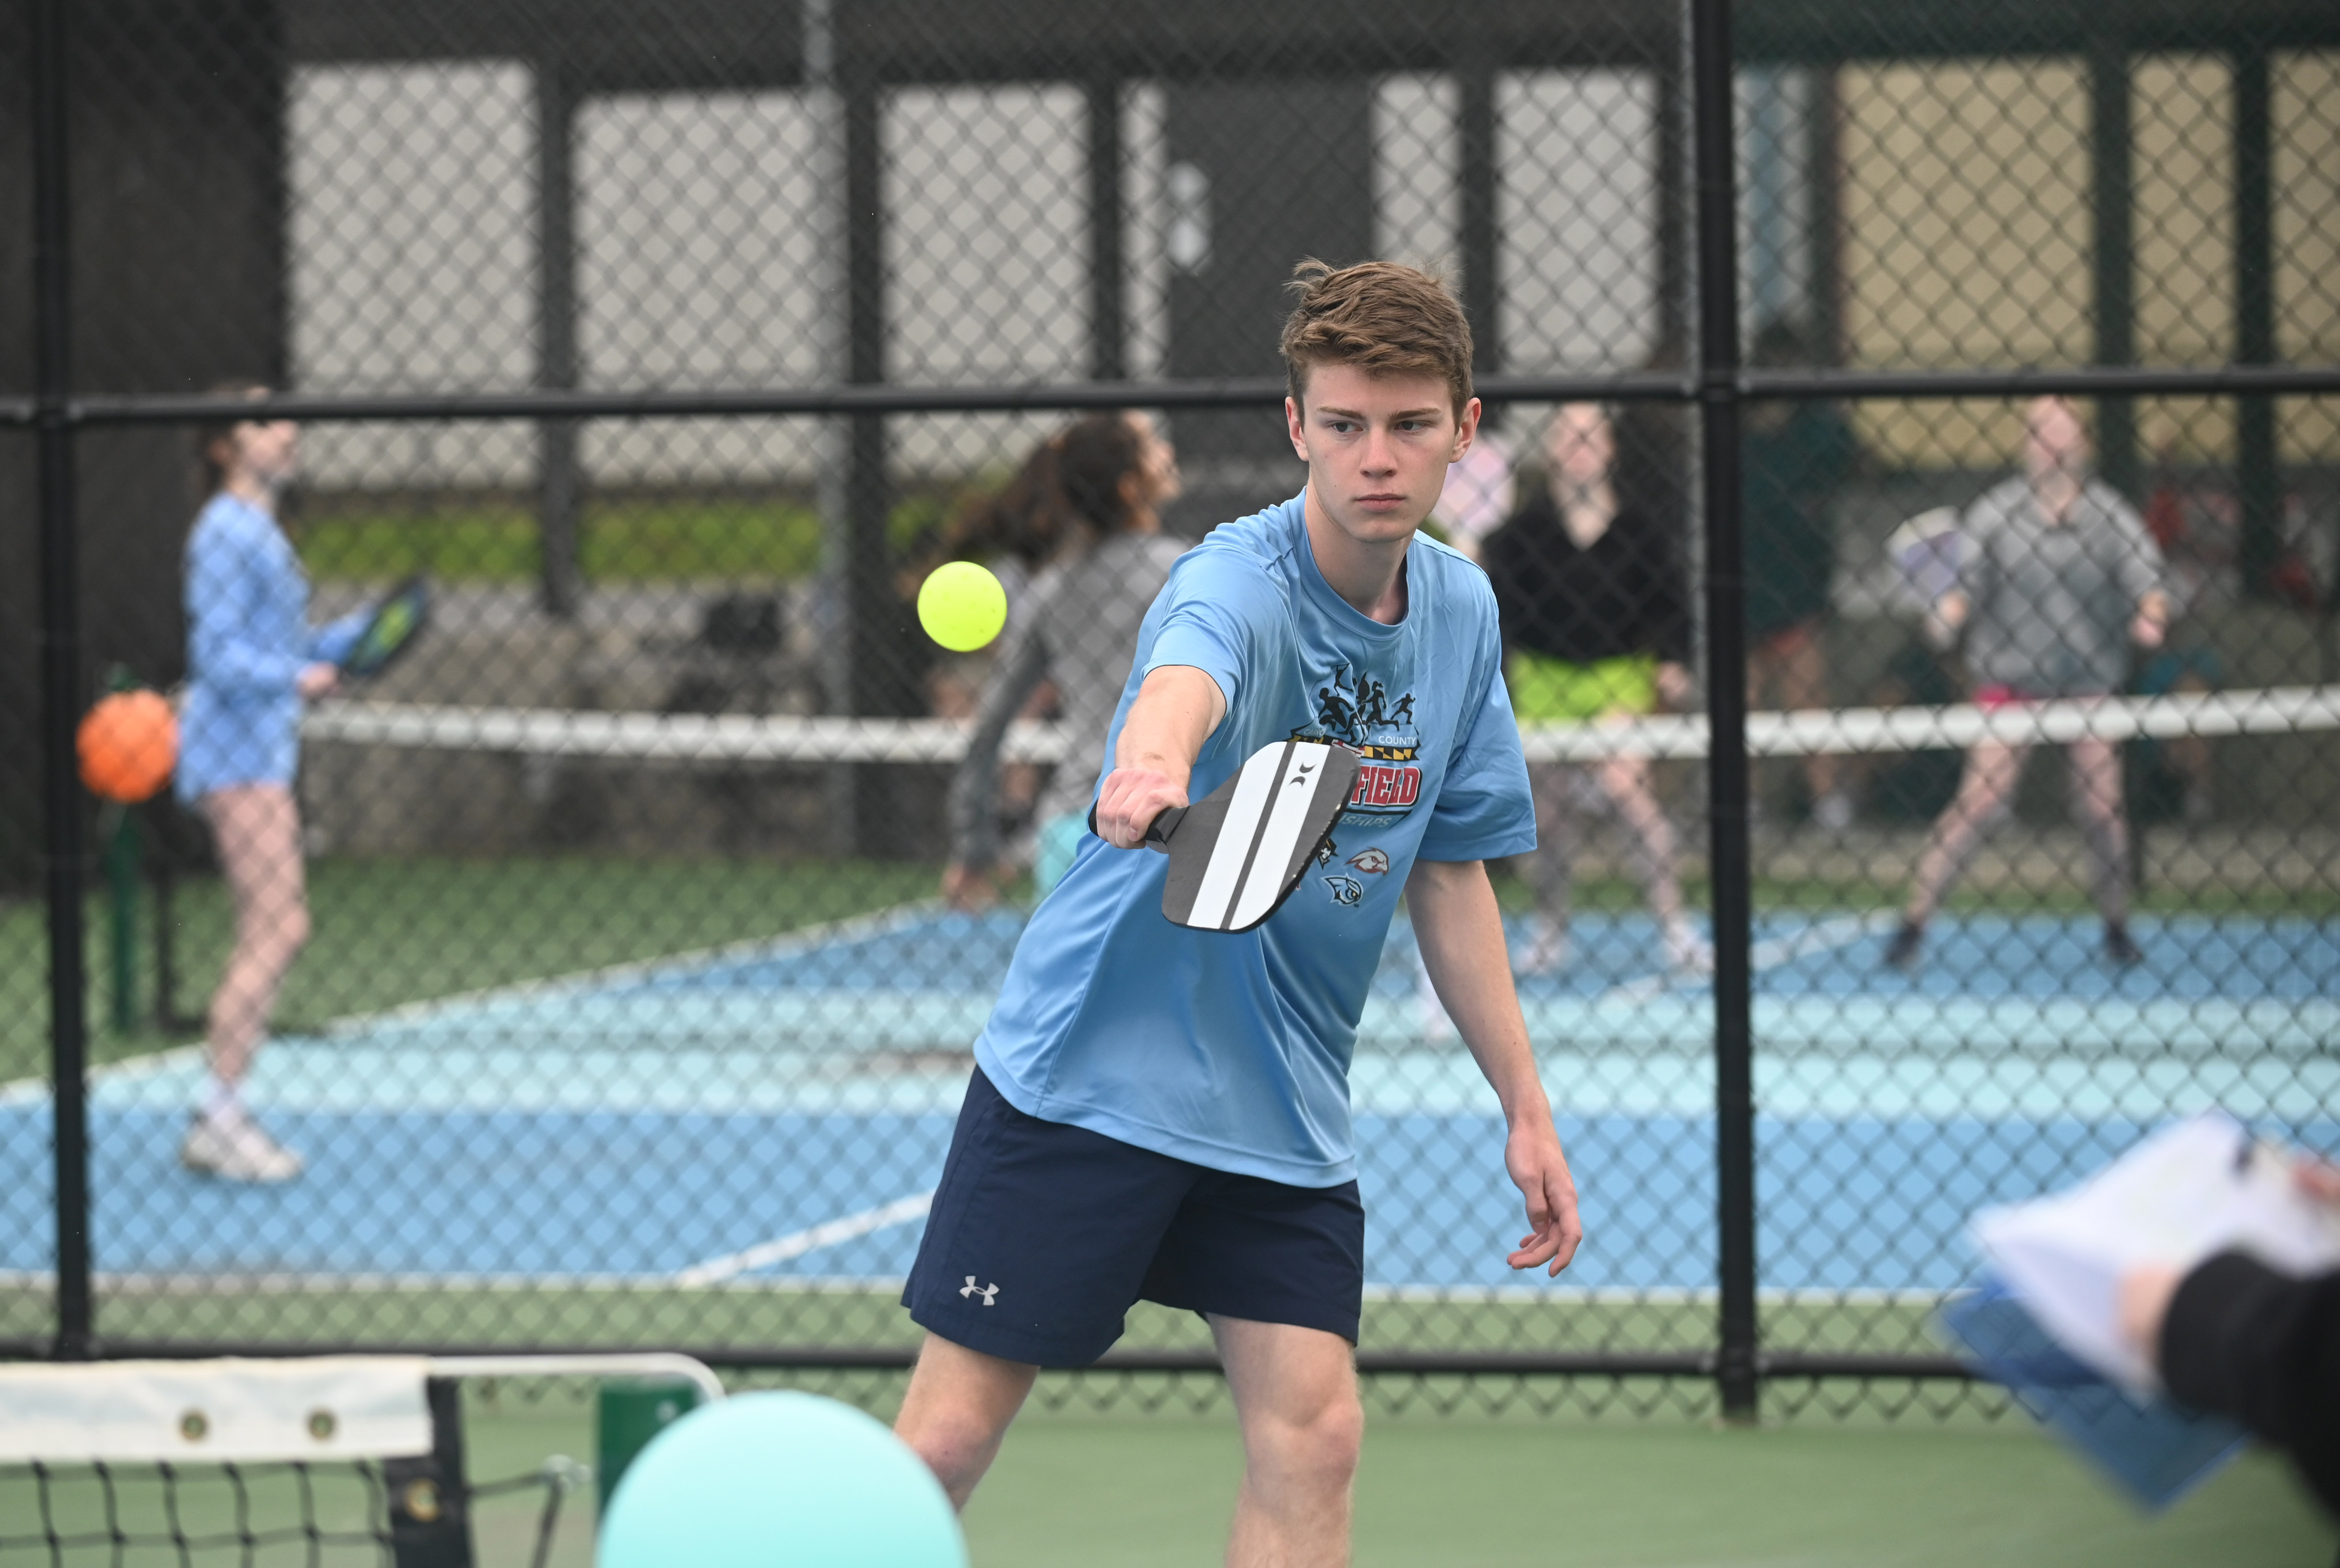 Jace Calhoun makes a play on the ball as he competes in a pickleball tournament at Coppermine 4 Seasons on Tuesday. The tournament was organized by Manchester Valley High School juniors Brady Bonney and Leigh Hoke to raise money and support for Morgan's Message, a non-profit supporting student-athlete mental health initiatives. (Brian Krista/staff photo)